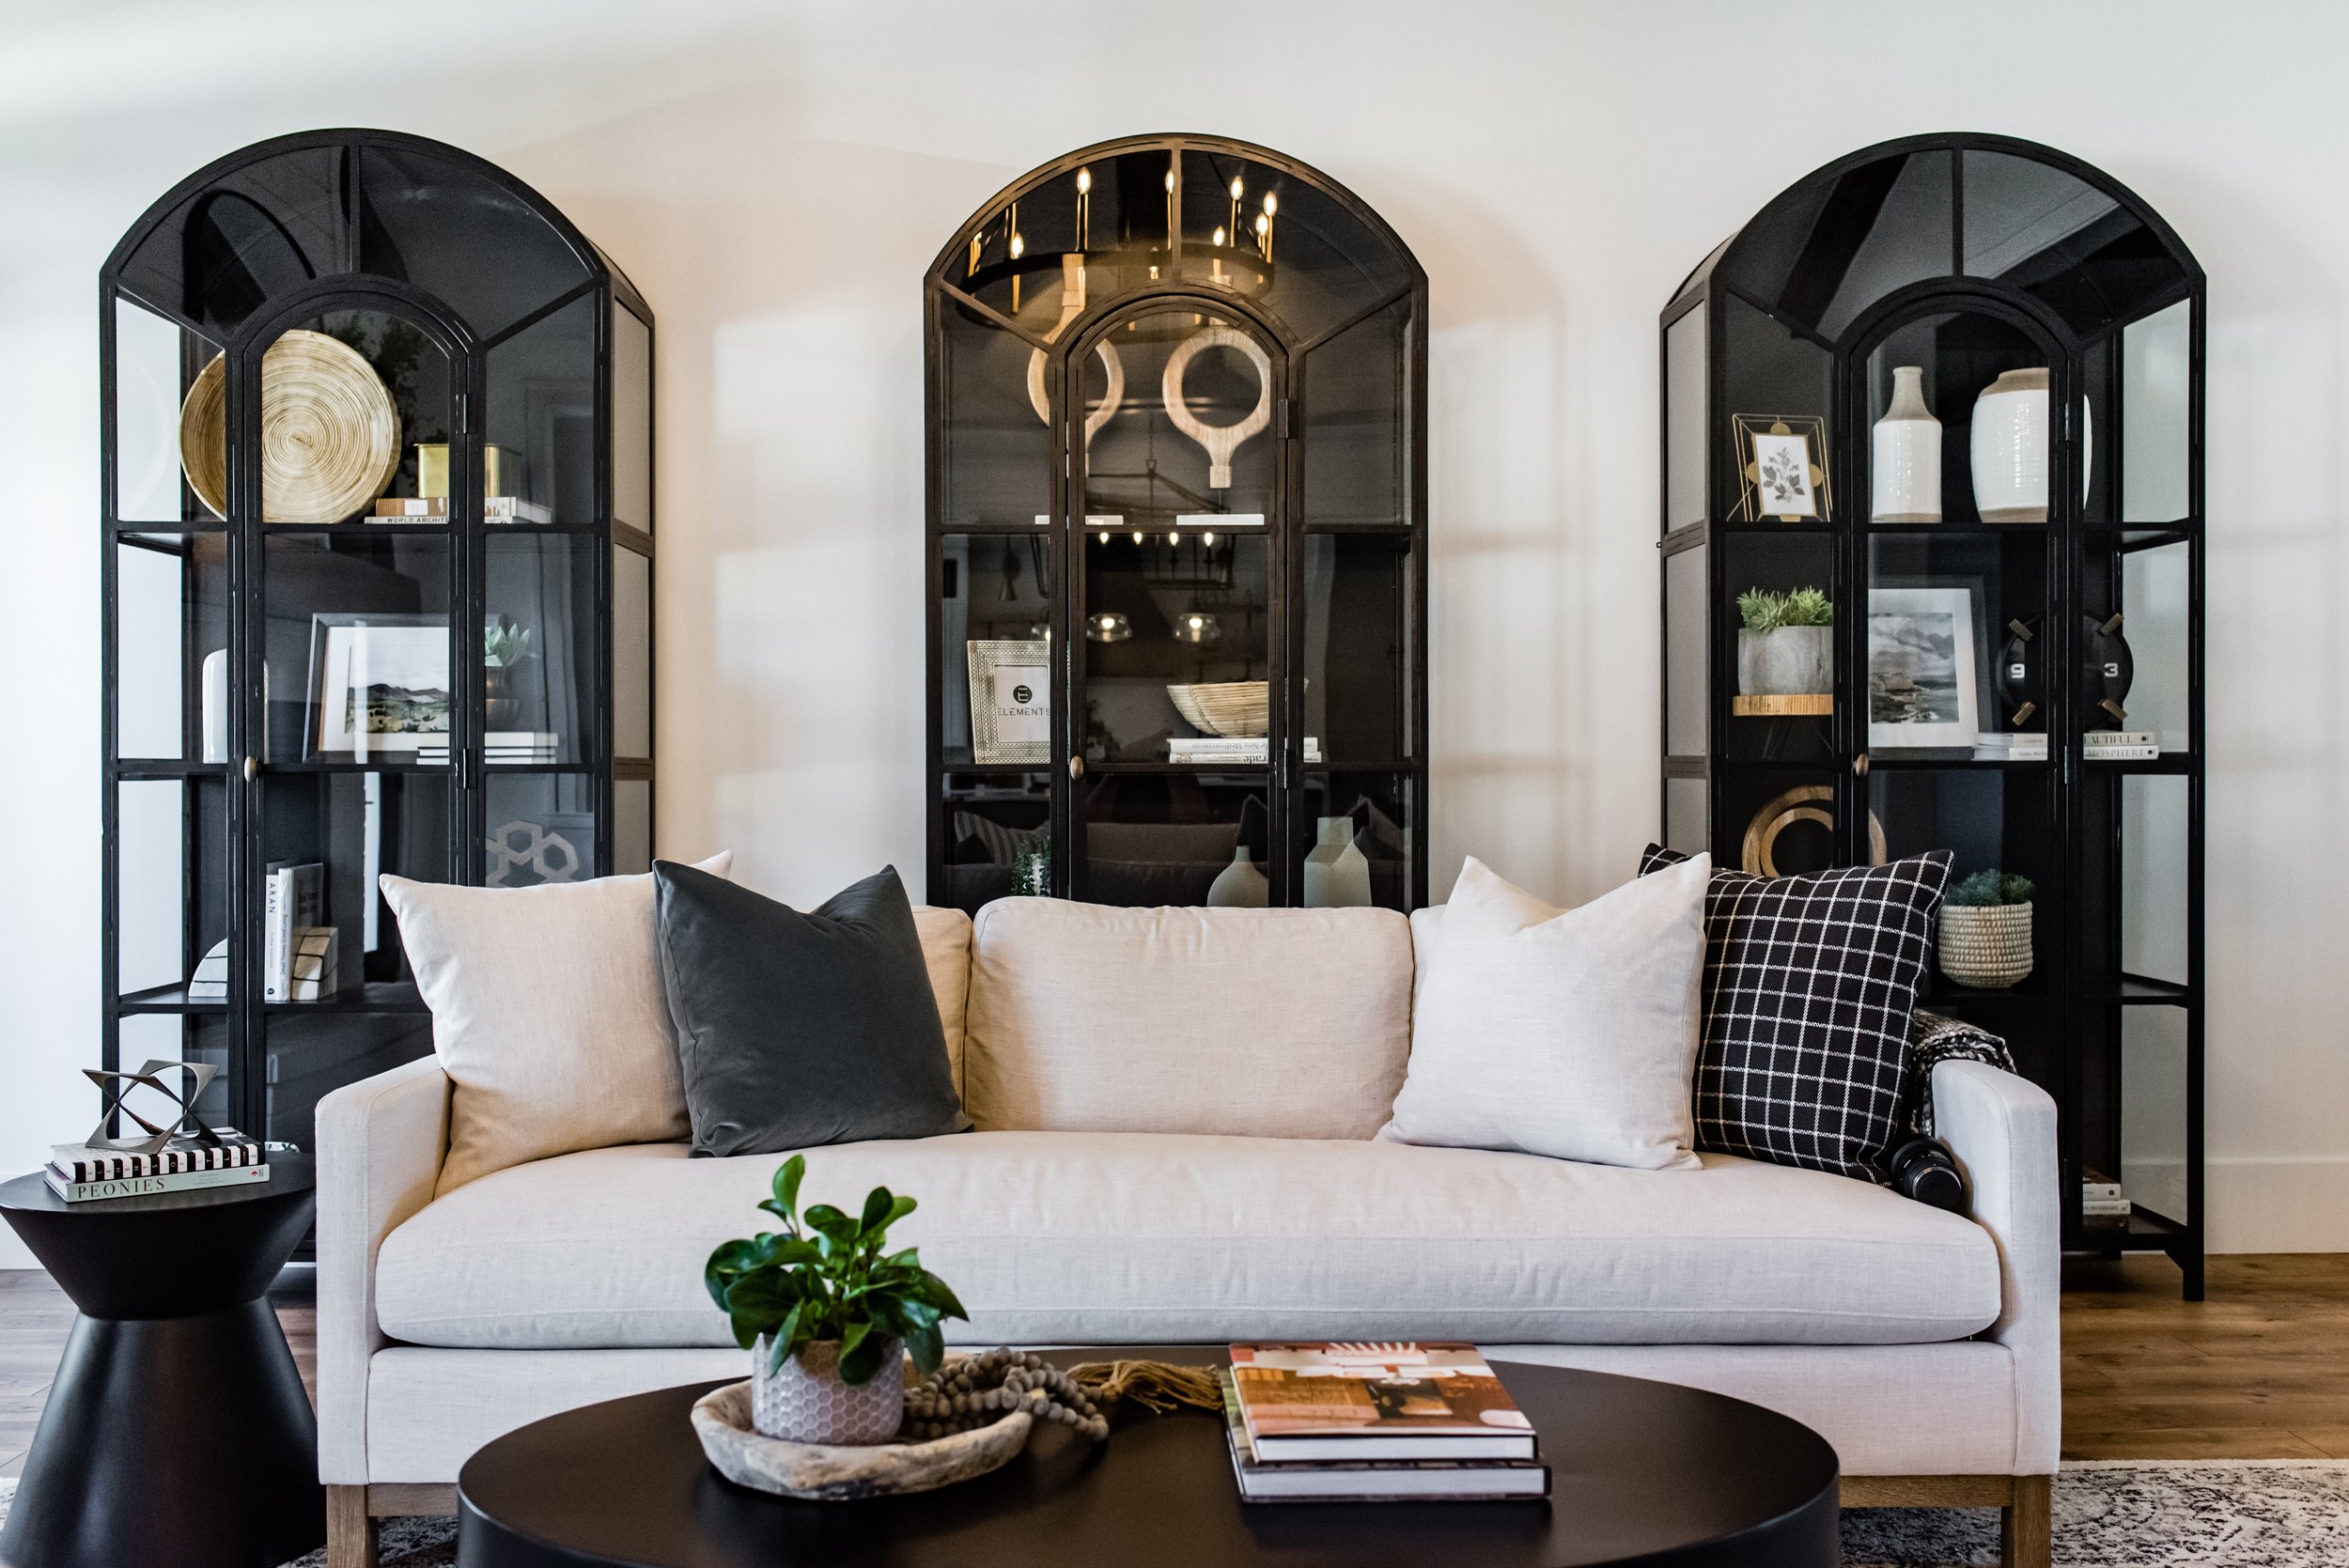  A tip from Liz Powell design is that a home should reflect the people who live there. Including favorite art prints, beloved travel souvenirs, and family photos #interiordesigner #LizPowellDesign #InteriorDesignUtah #buildingahome #finishingtouches 